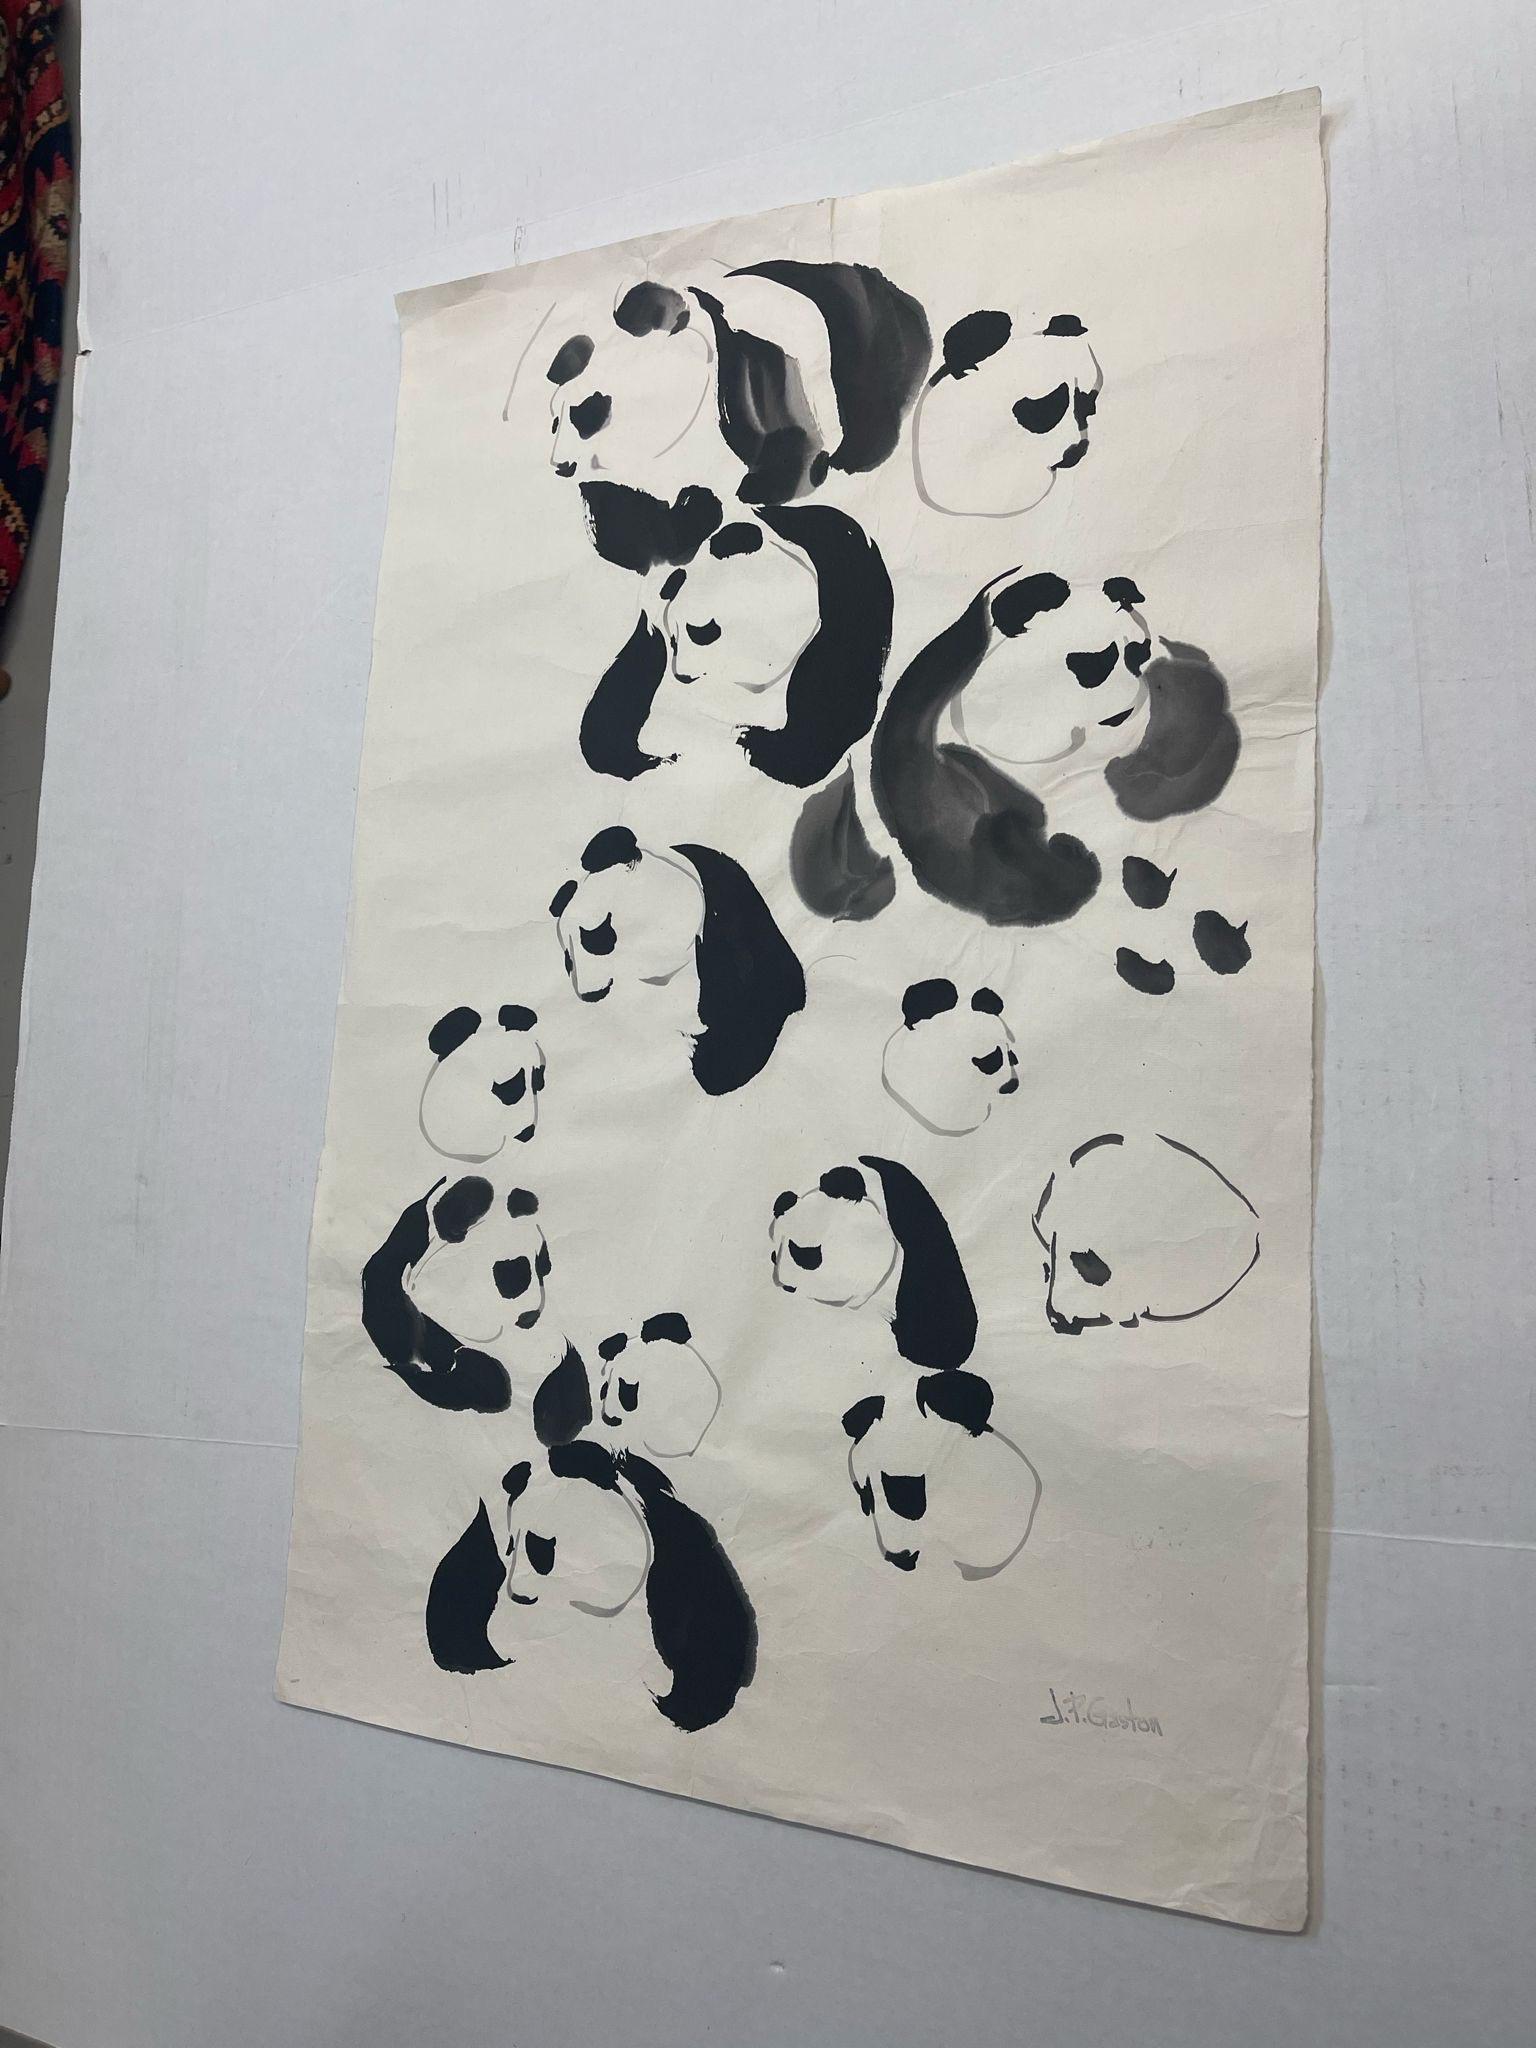 Mid-Century Modern Vintage Signed Original Watercolor Painting of Panda Bear Study. For Sale